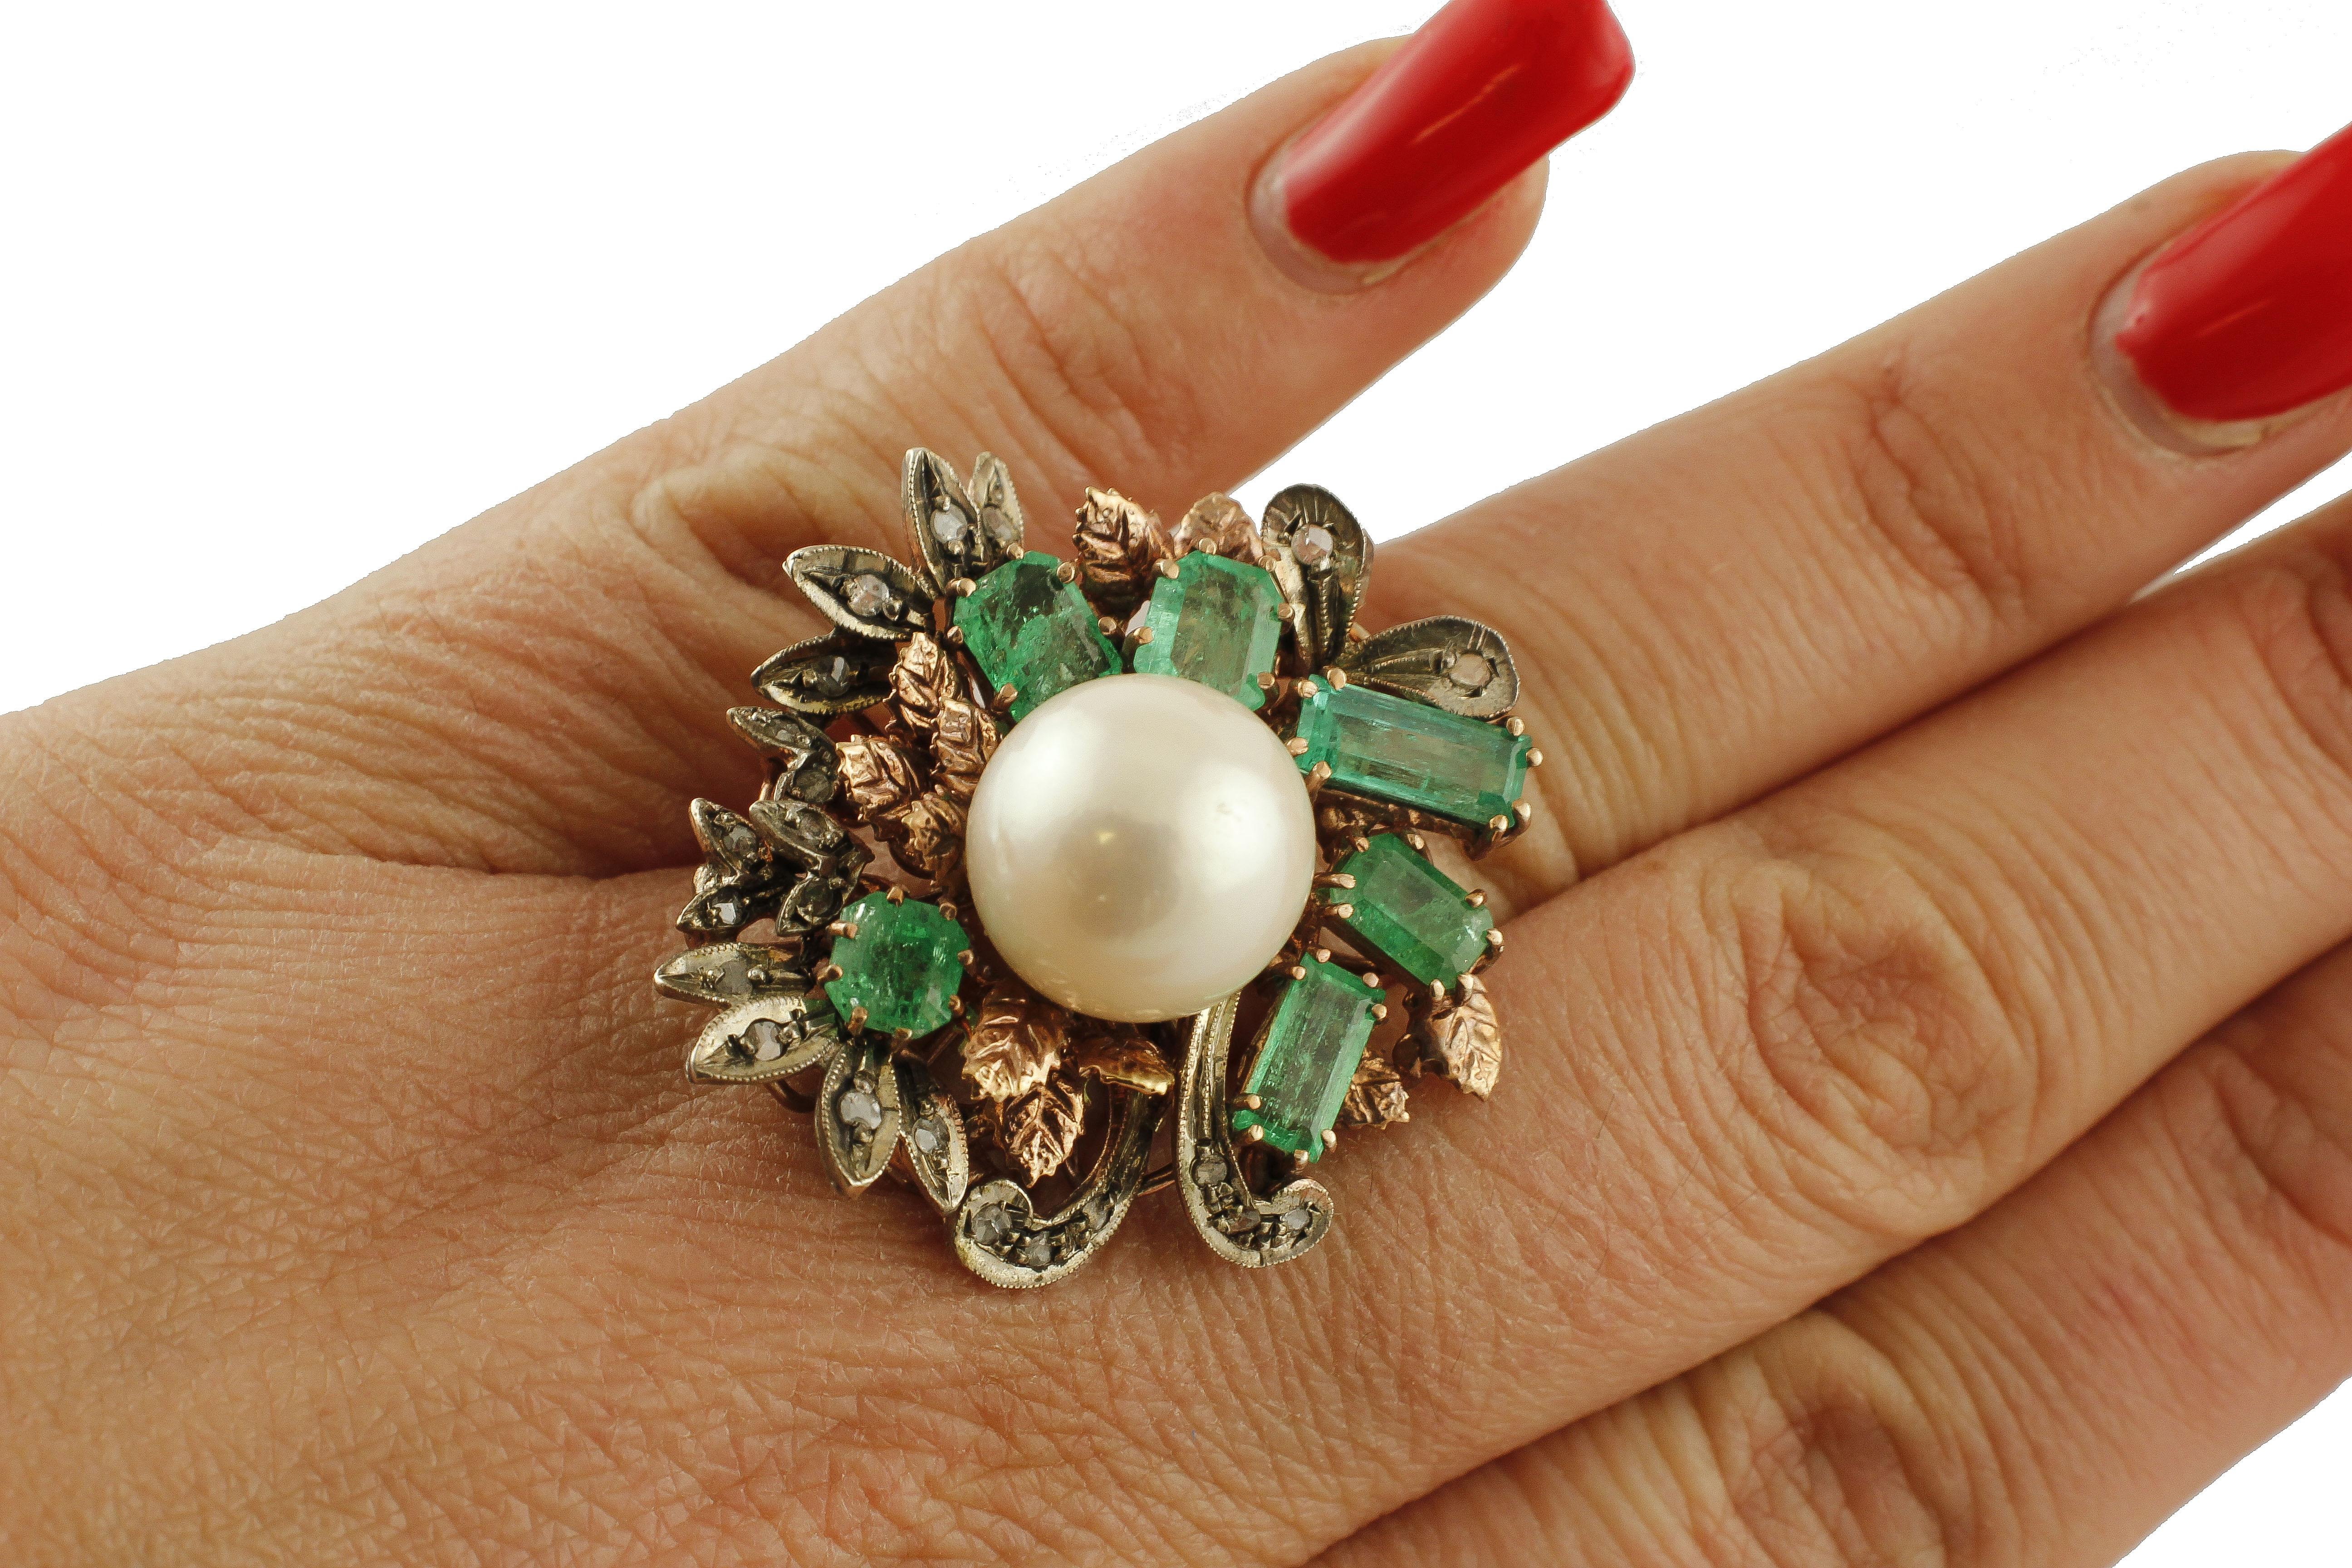 South Sea Pearl, Diamonds, Emeralds, 9 Karat Rose Gold and Silver Ring 1